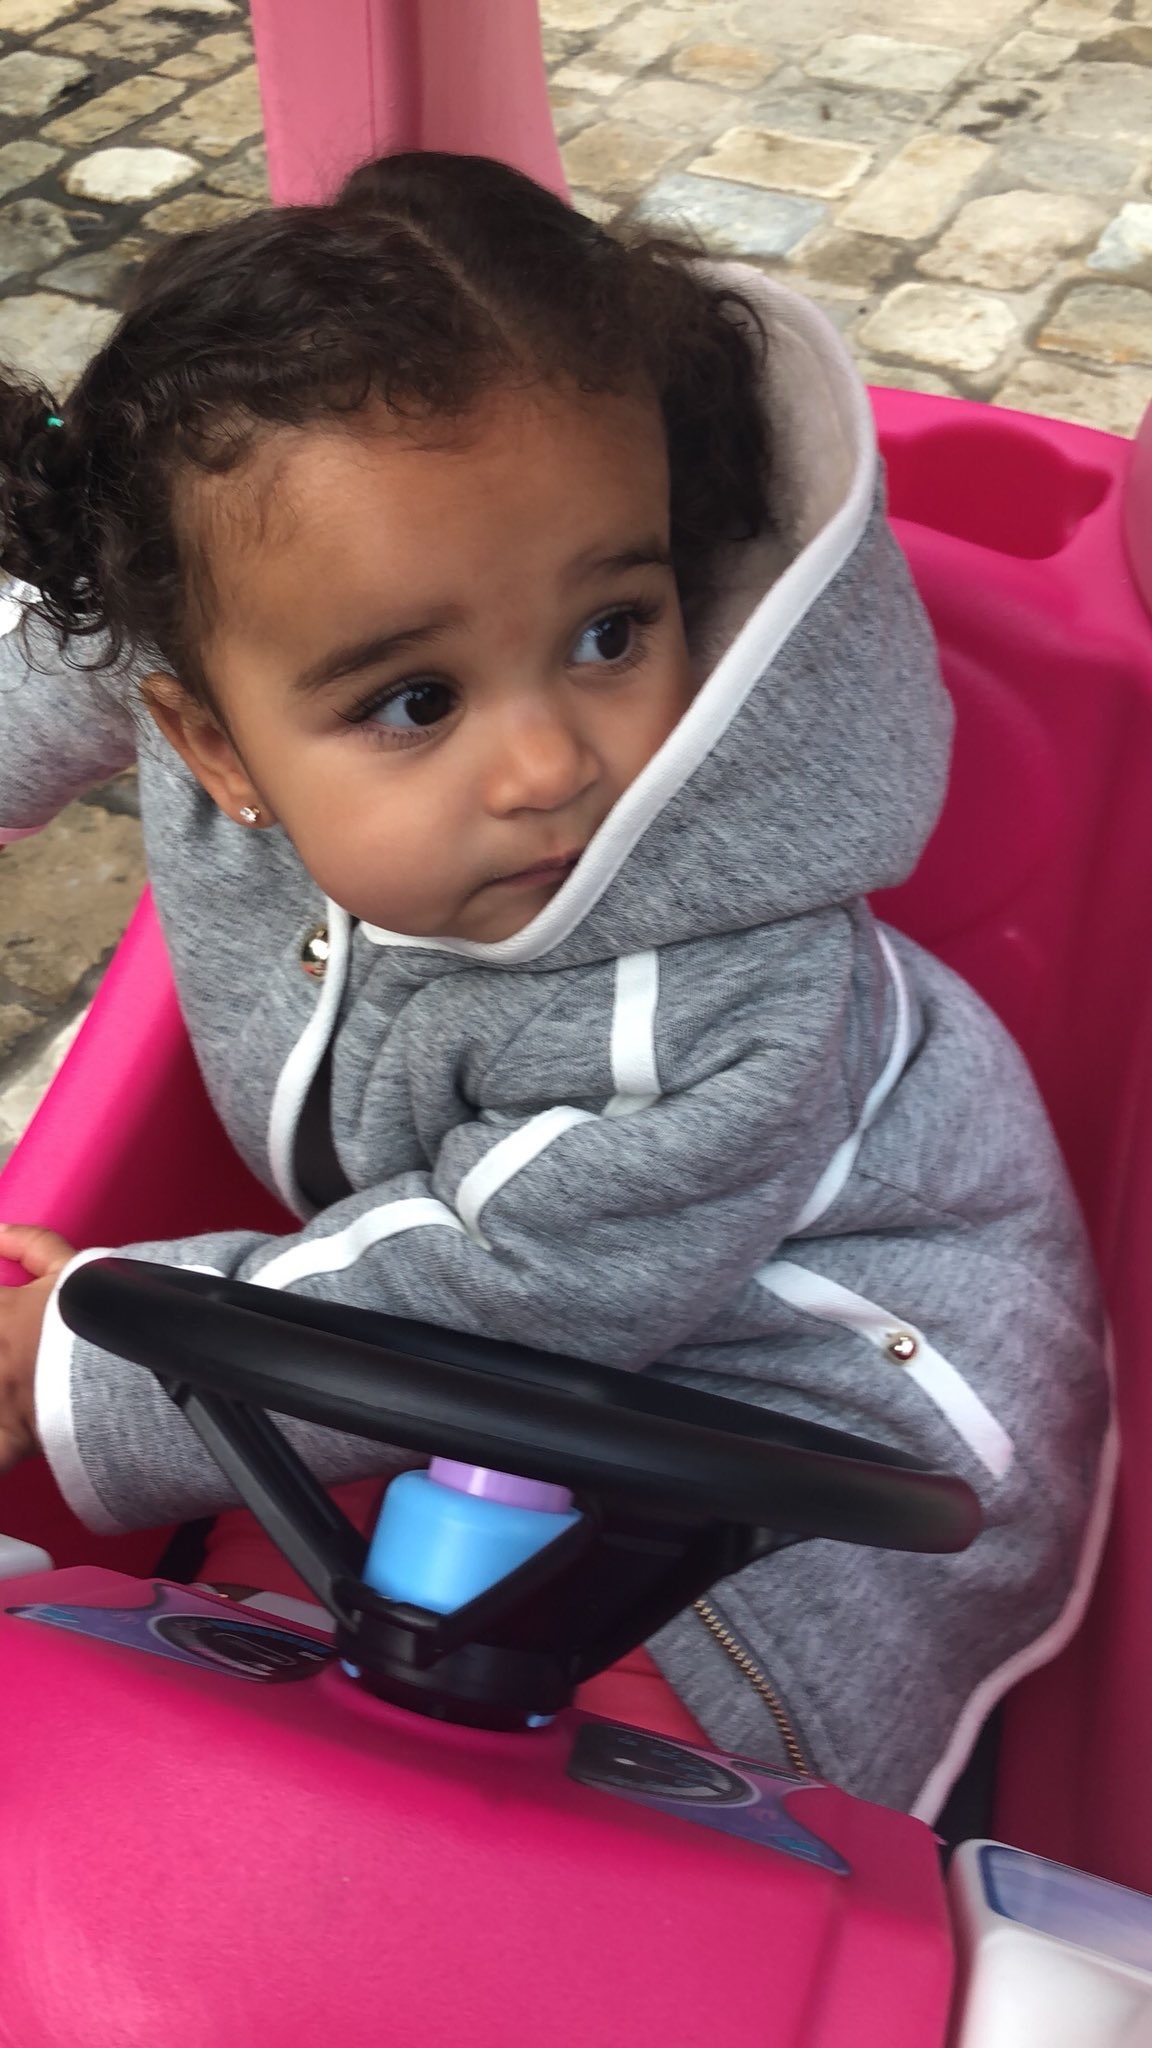 DREAM KARDASHIAN IS LITTLE 'TIKE' IN HER PRINCESS COUPE1152 x 2048